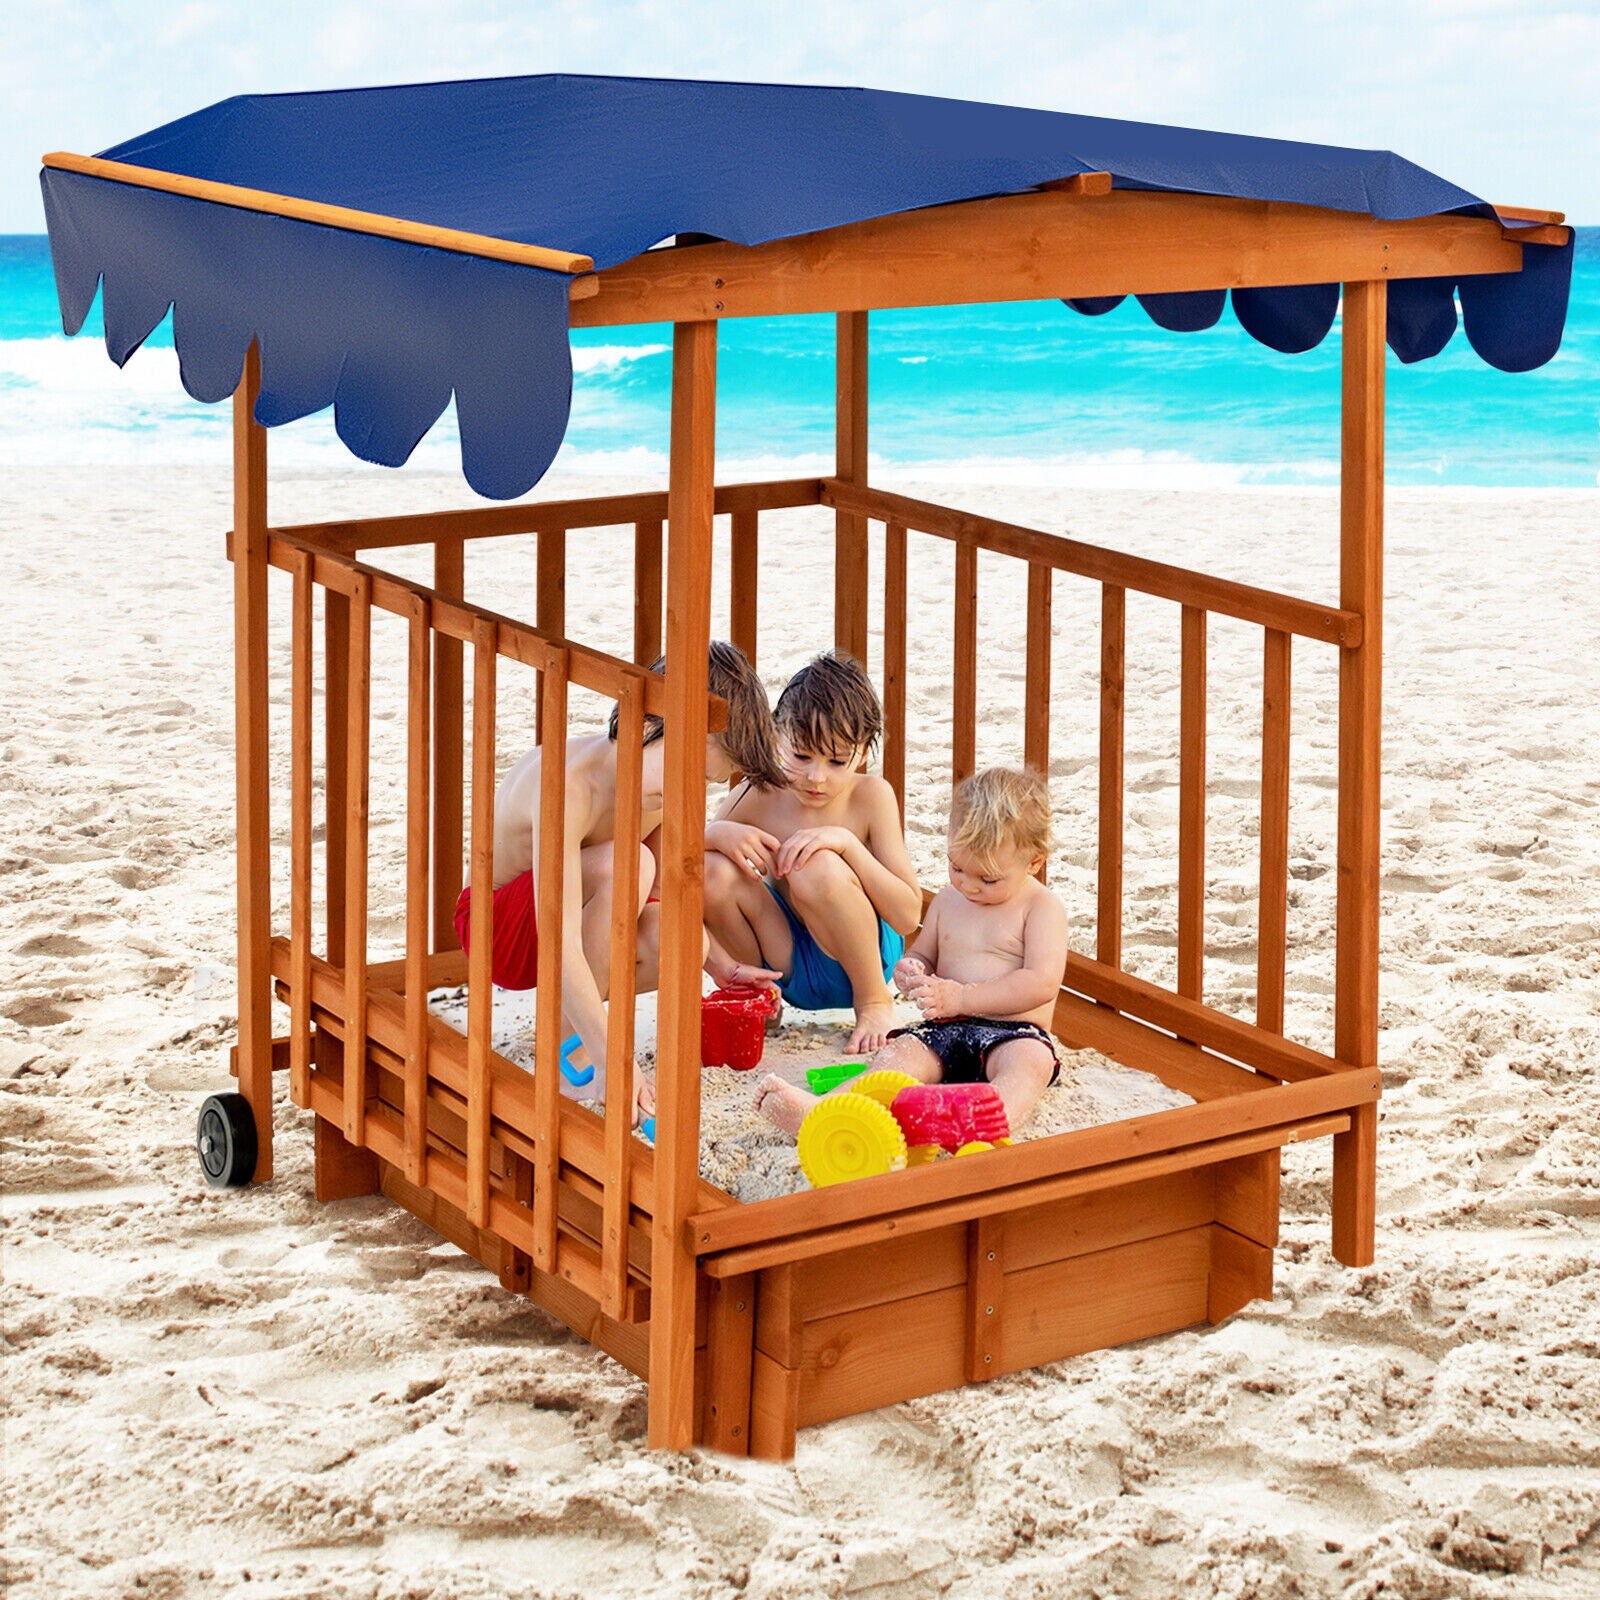 Kids Outdoor Wooden Retractable Sandbox with Canopy and Built-in Wheels